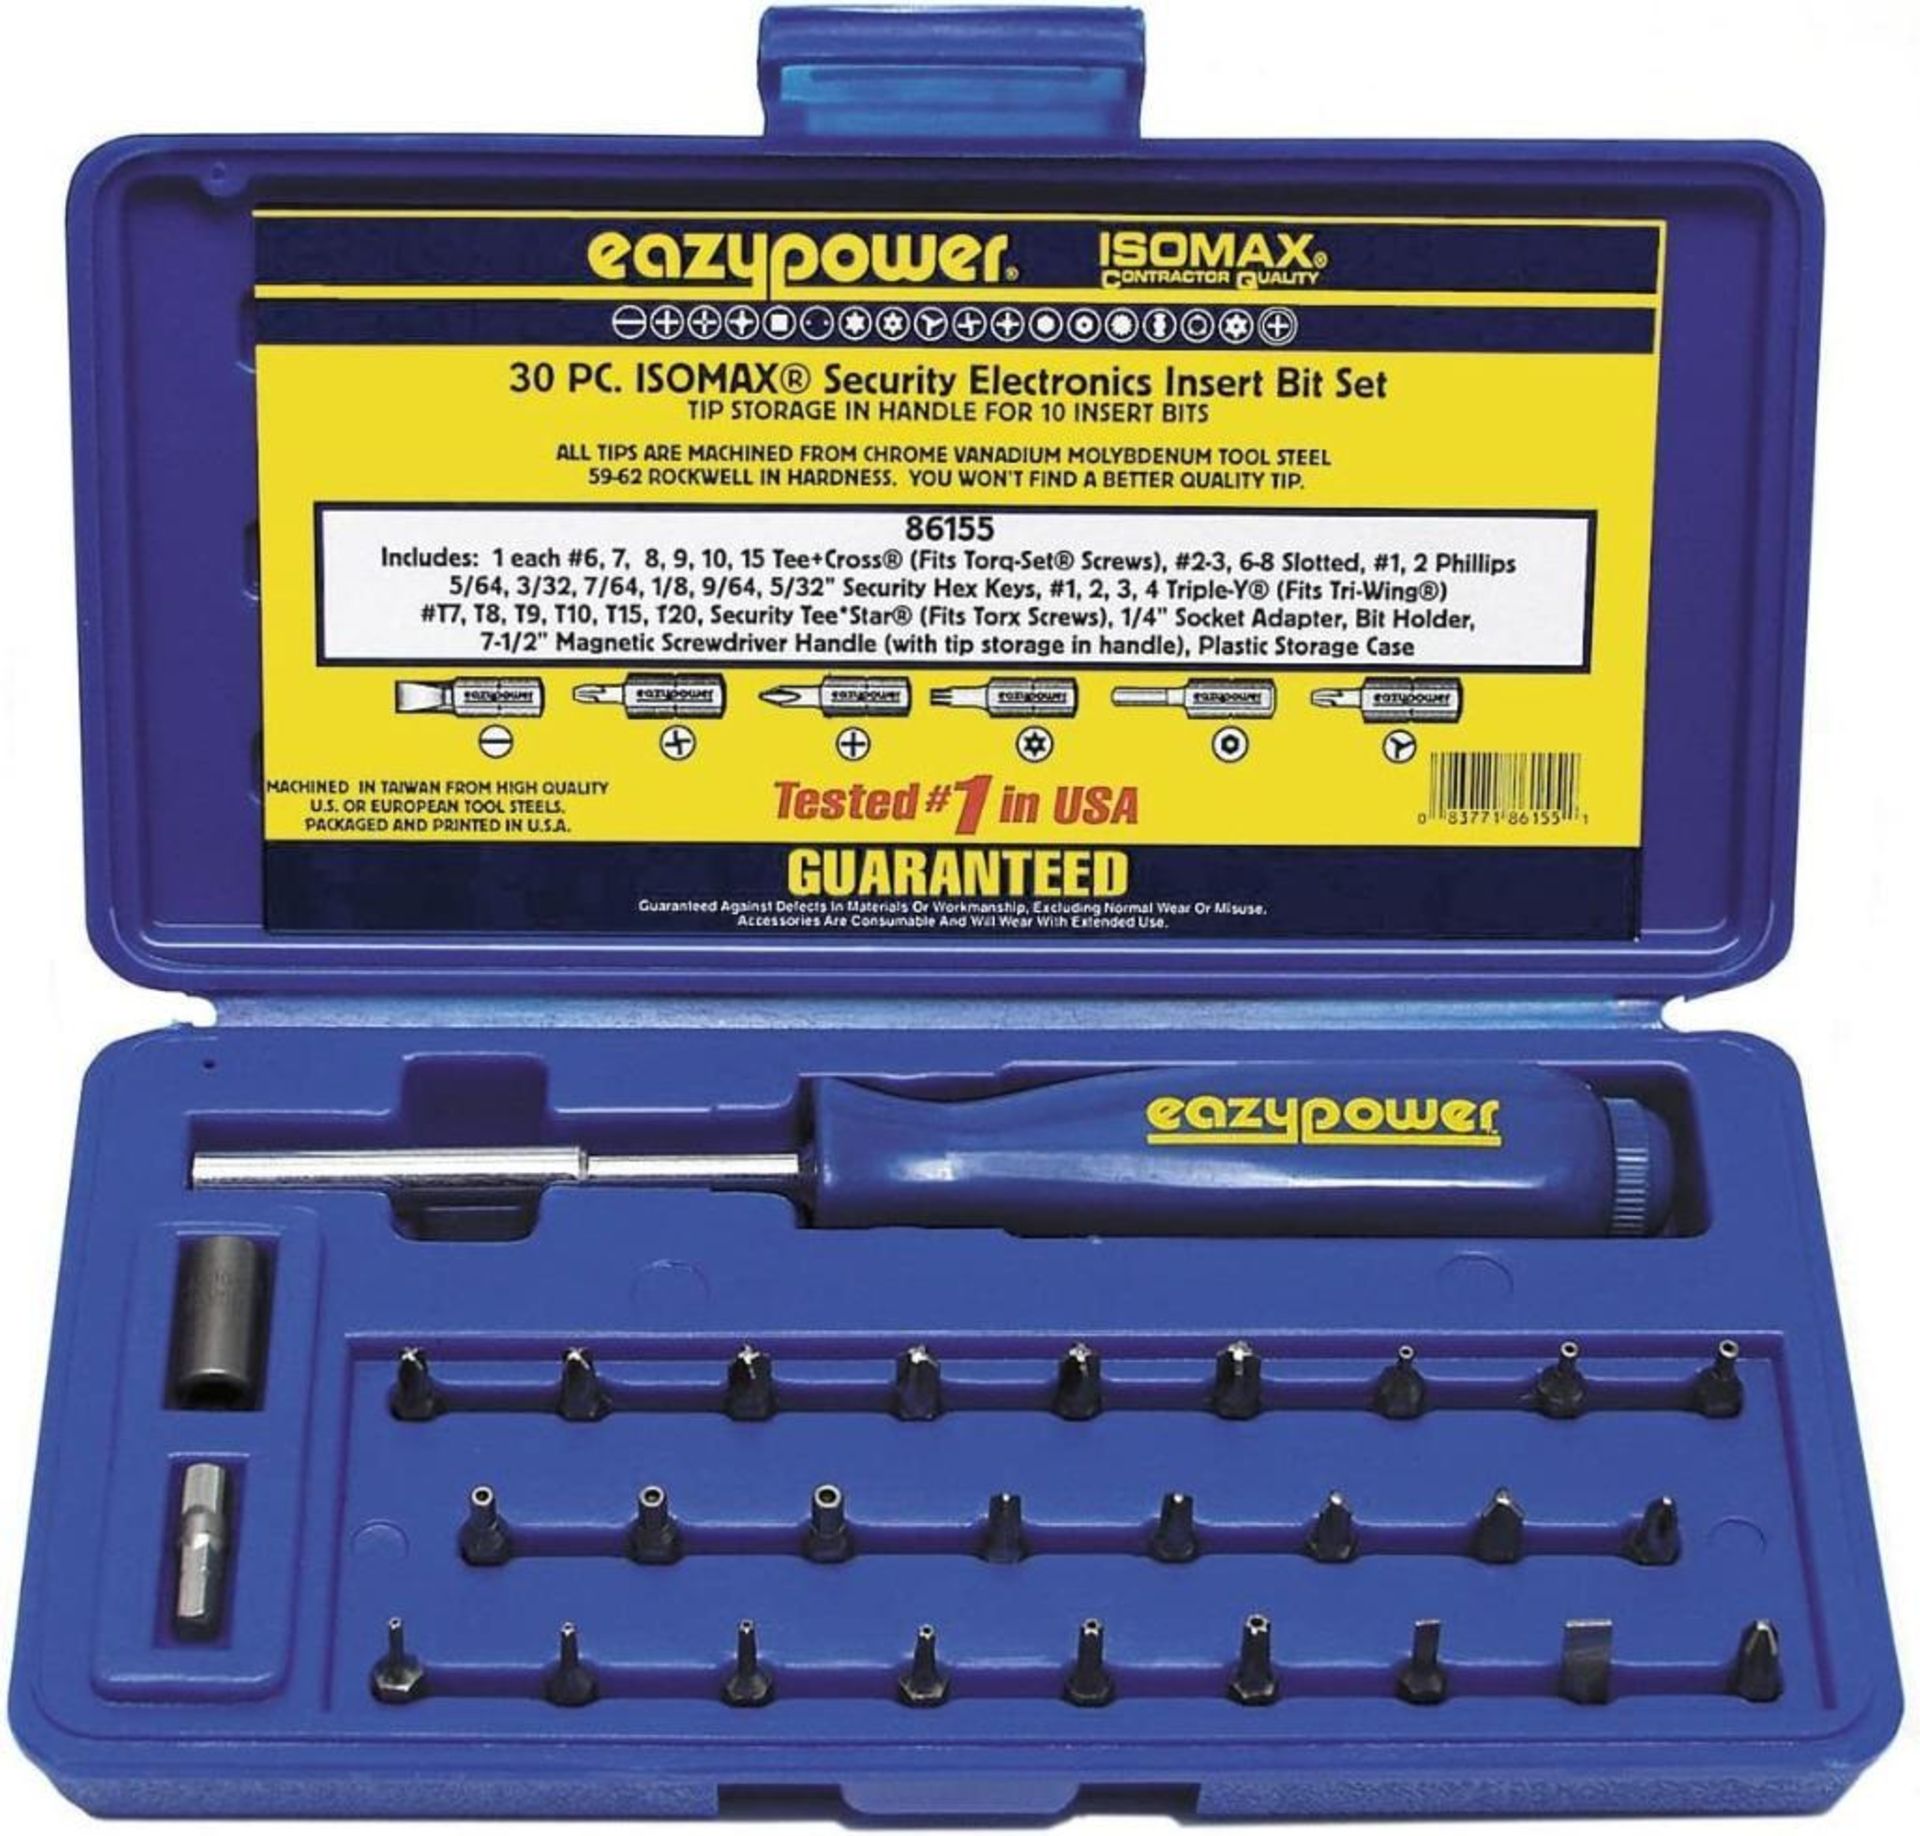 (40) EAZY POWER 30 PIECE SCREW DRIVE TOOL KIT BRAND / MODEL: EAZY POWER 79551 THIS LOT IS: SOLD BY T